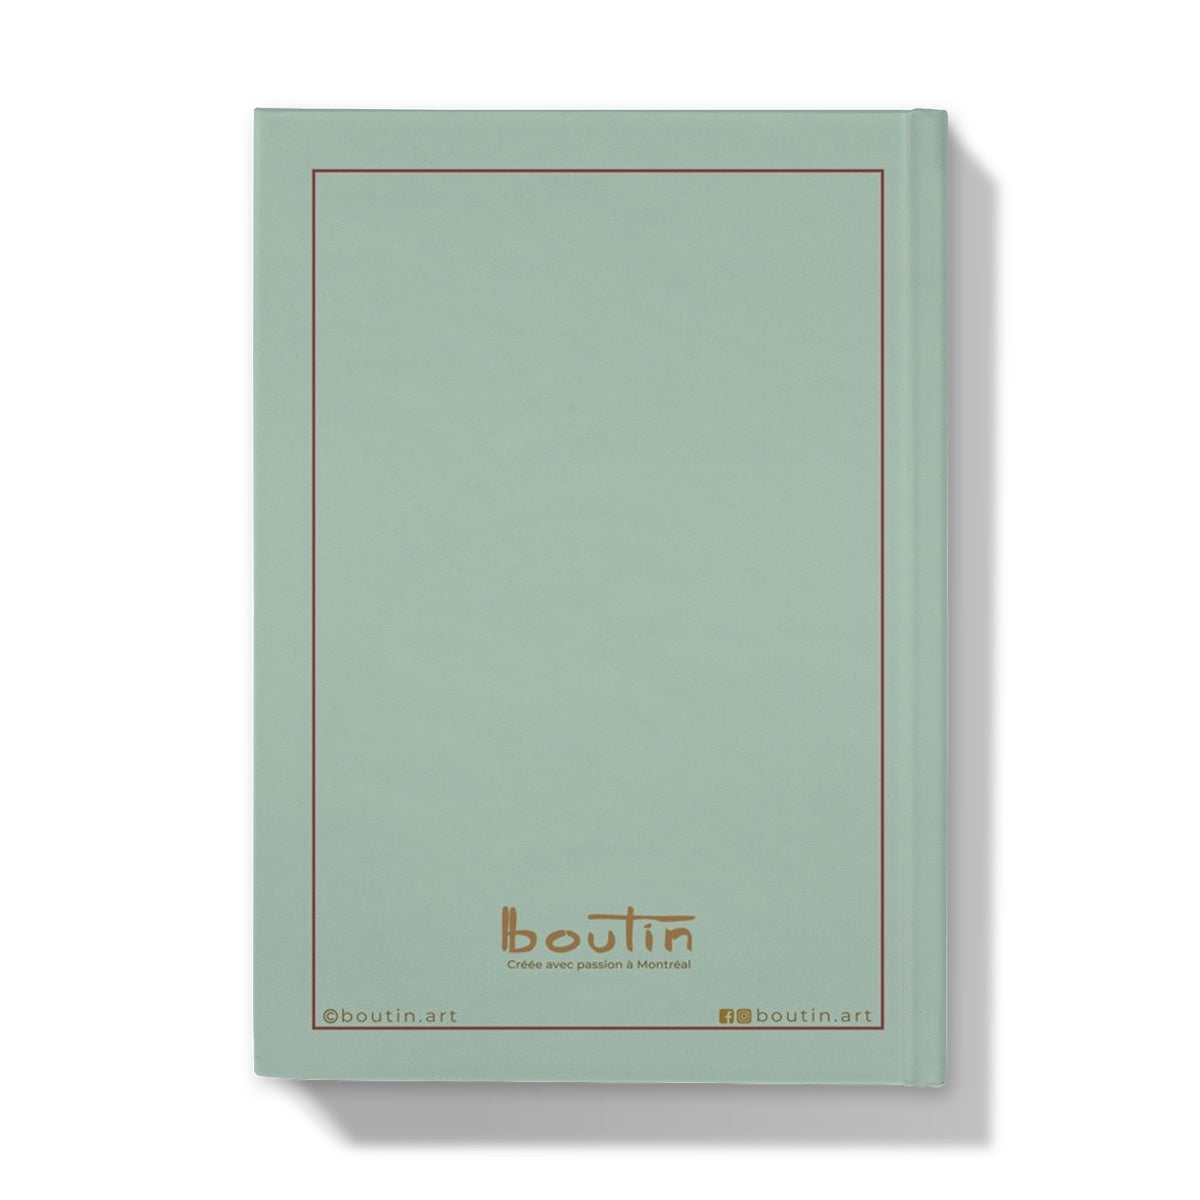 Green Flamingo - Notebook by the artist Boutin